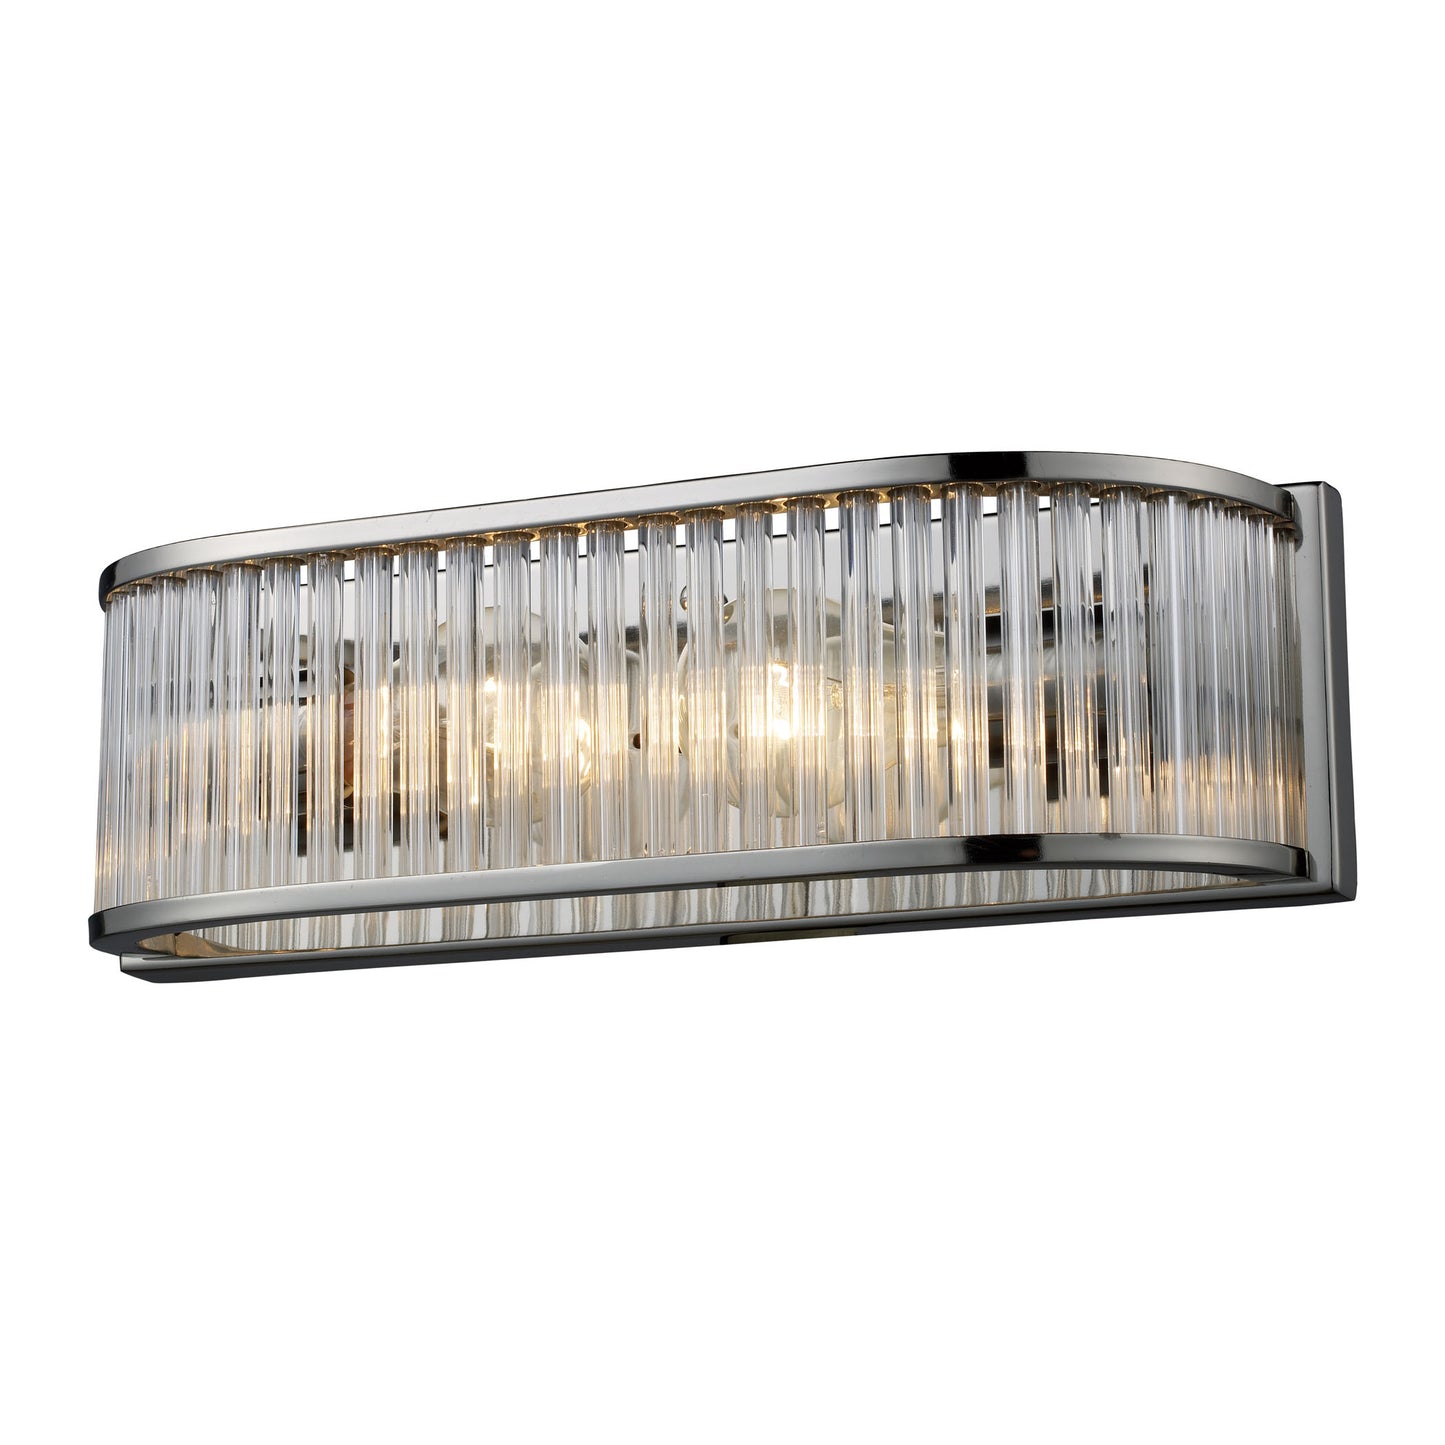 ELK Lighting 10126/2 - Braxton 14" Wide 2-Light Vanity Light in Polished Nickel with Ribbed Glass